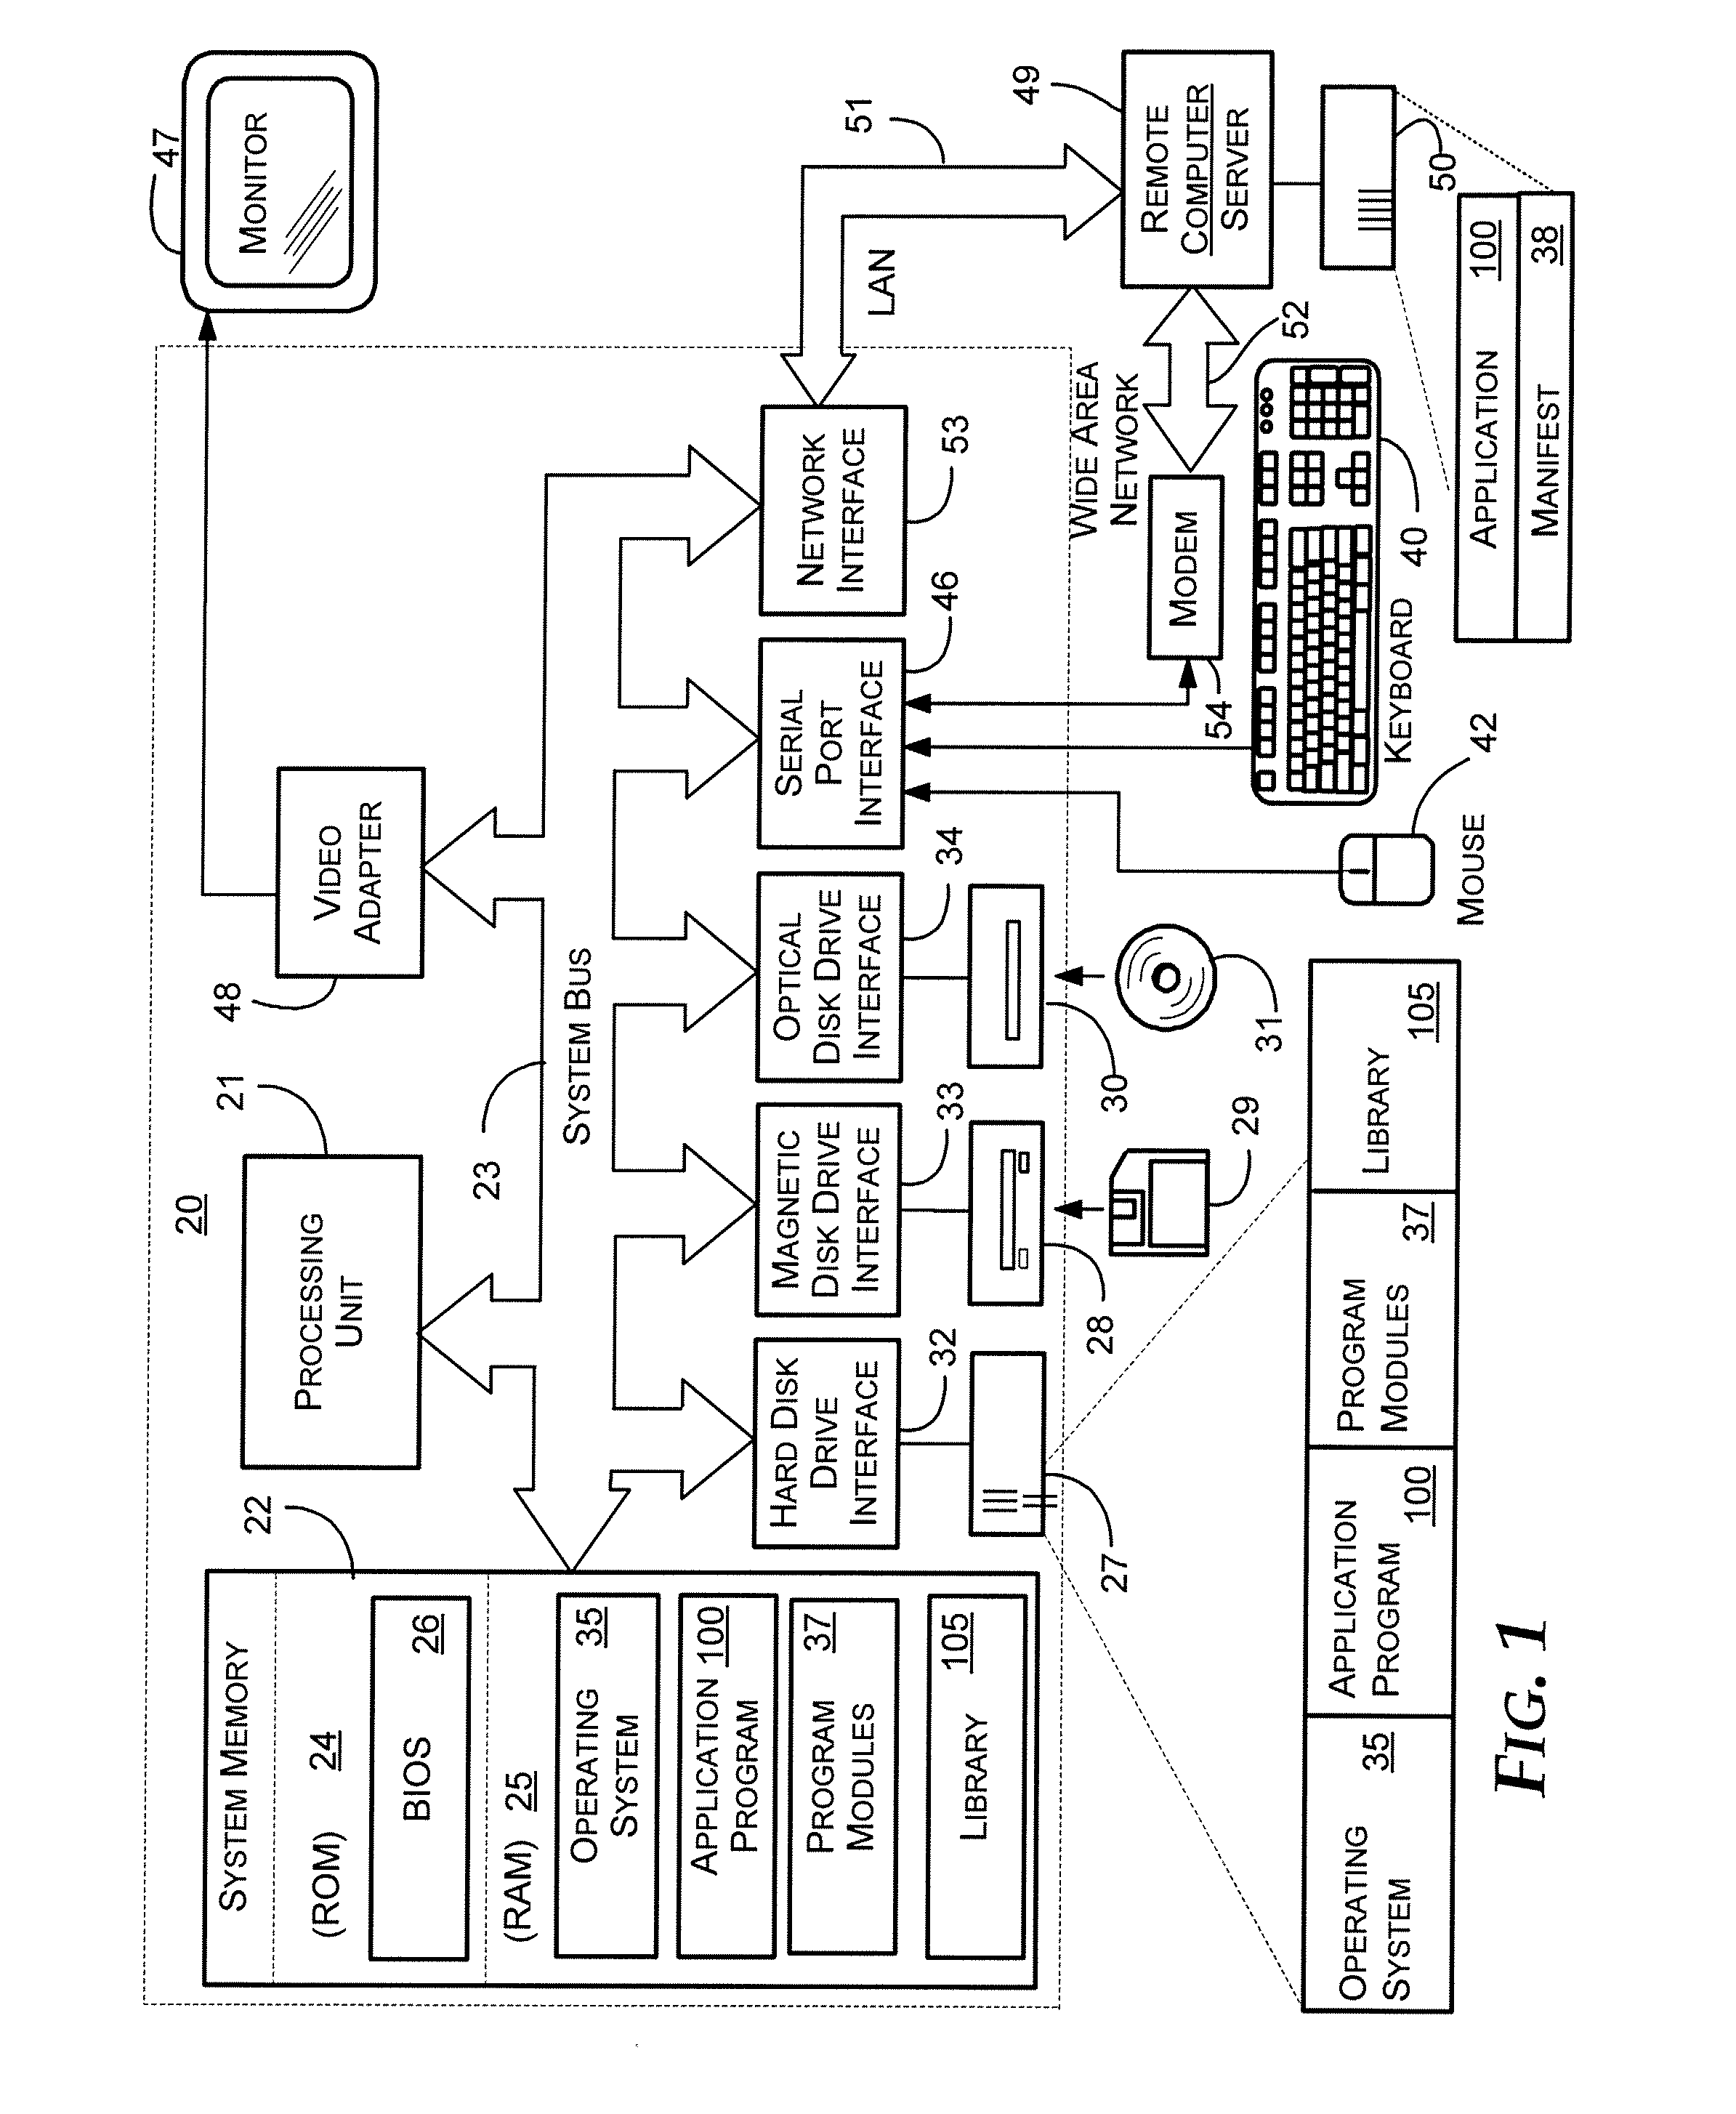 System for binding secrets to a computer system having tolerance for hardware changes